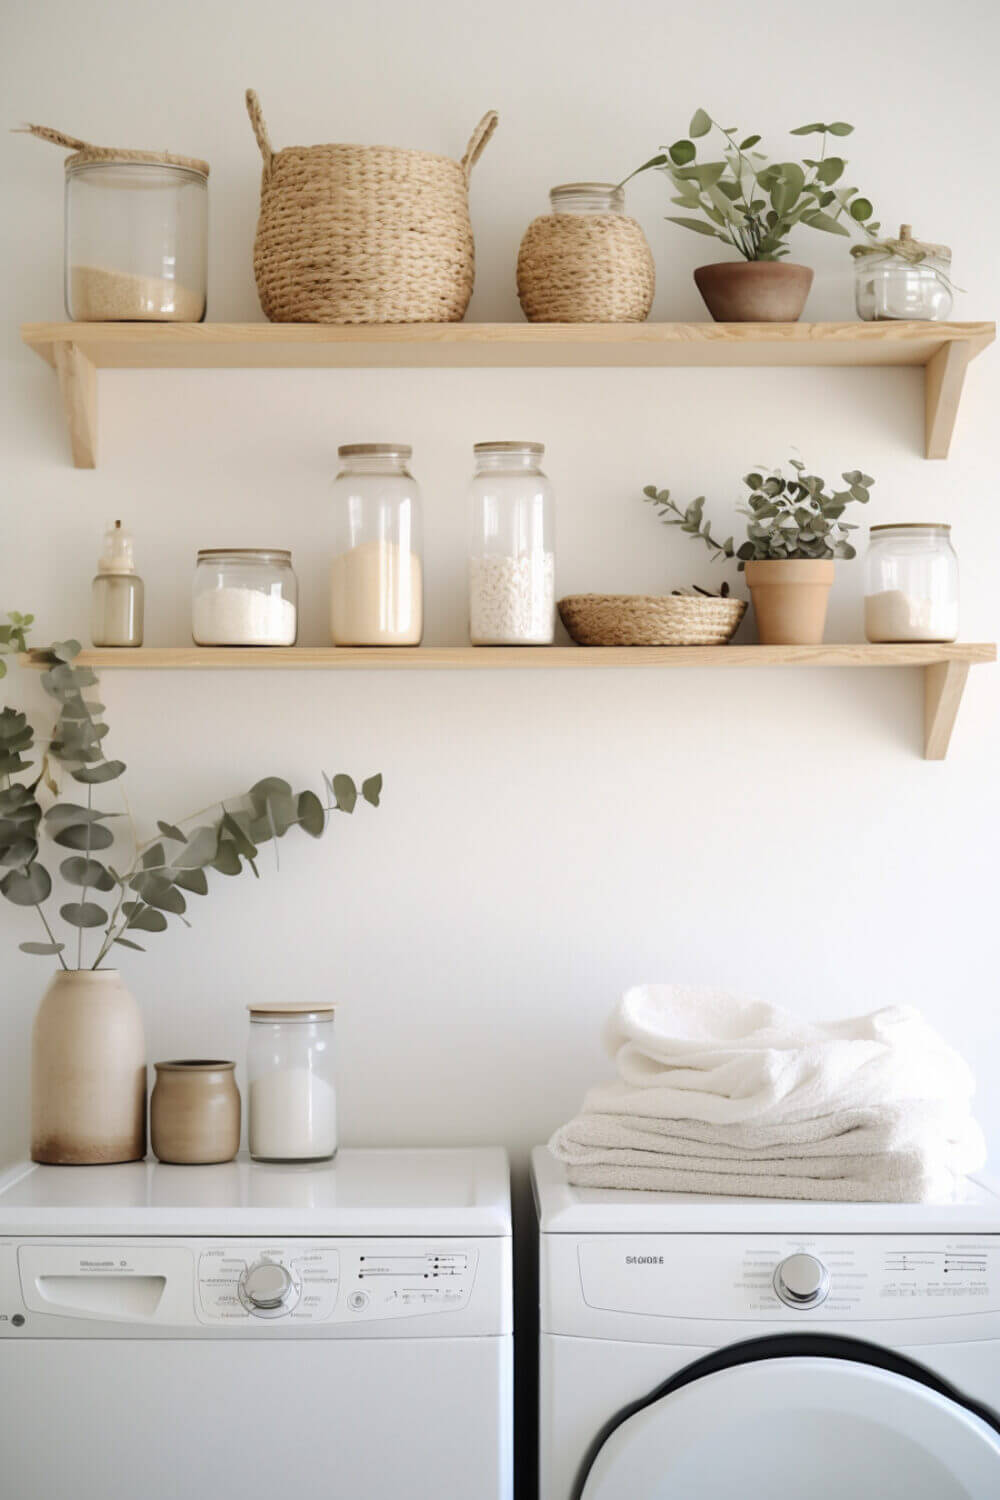 Laundry Room Shelf Ideas: The Only 5 Types You (Actually) Need to Know ...